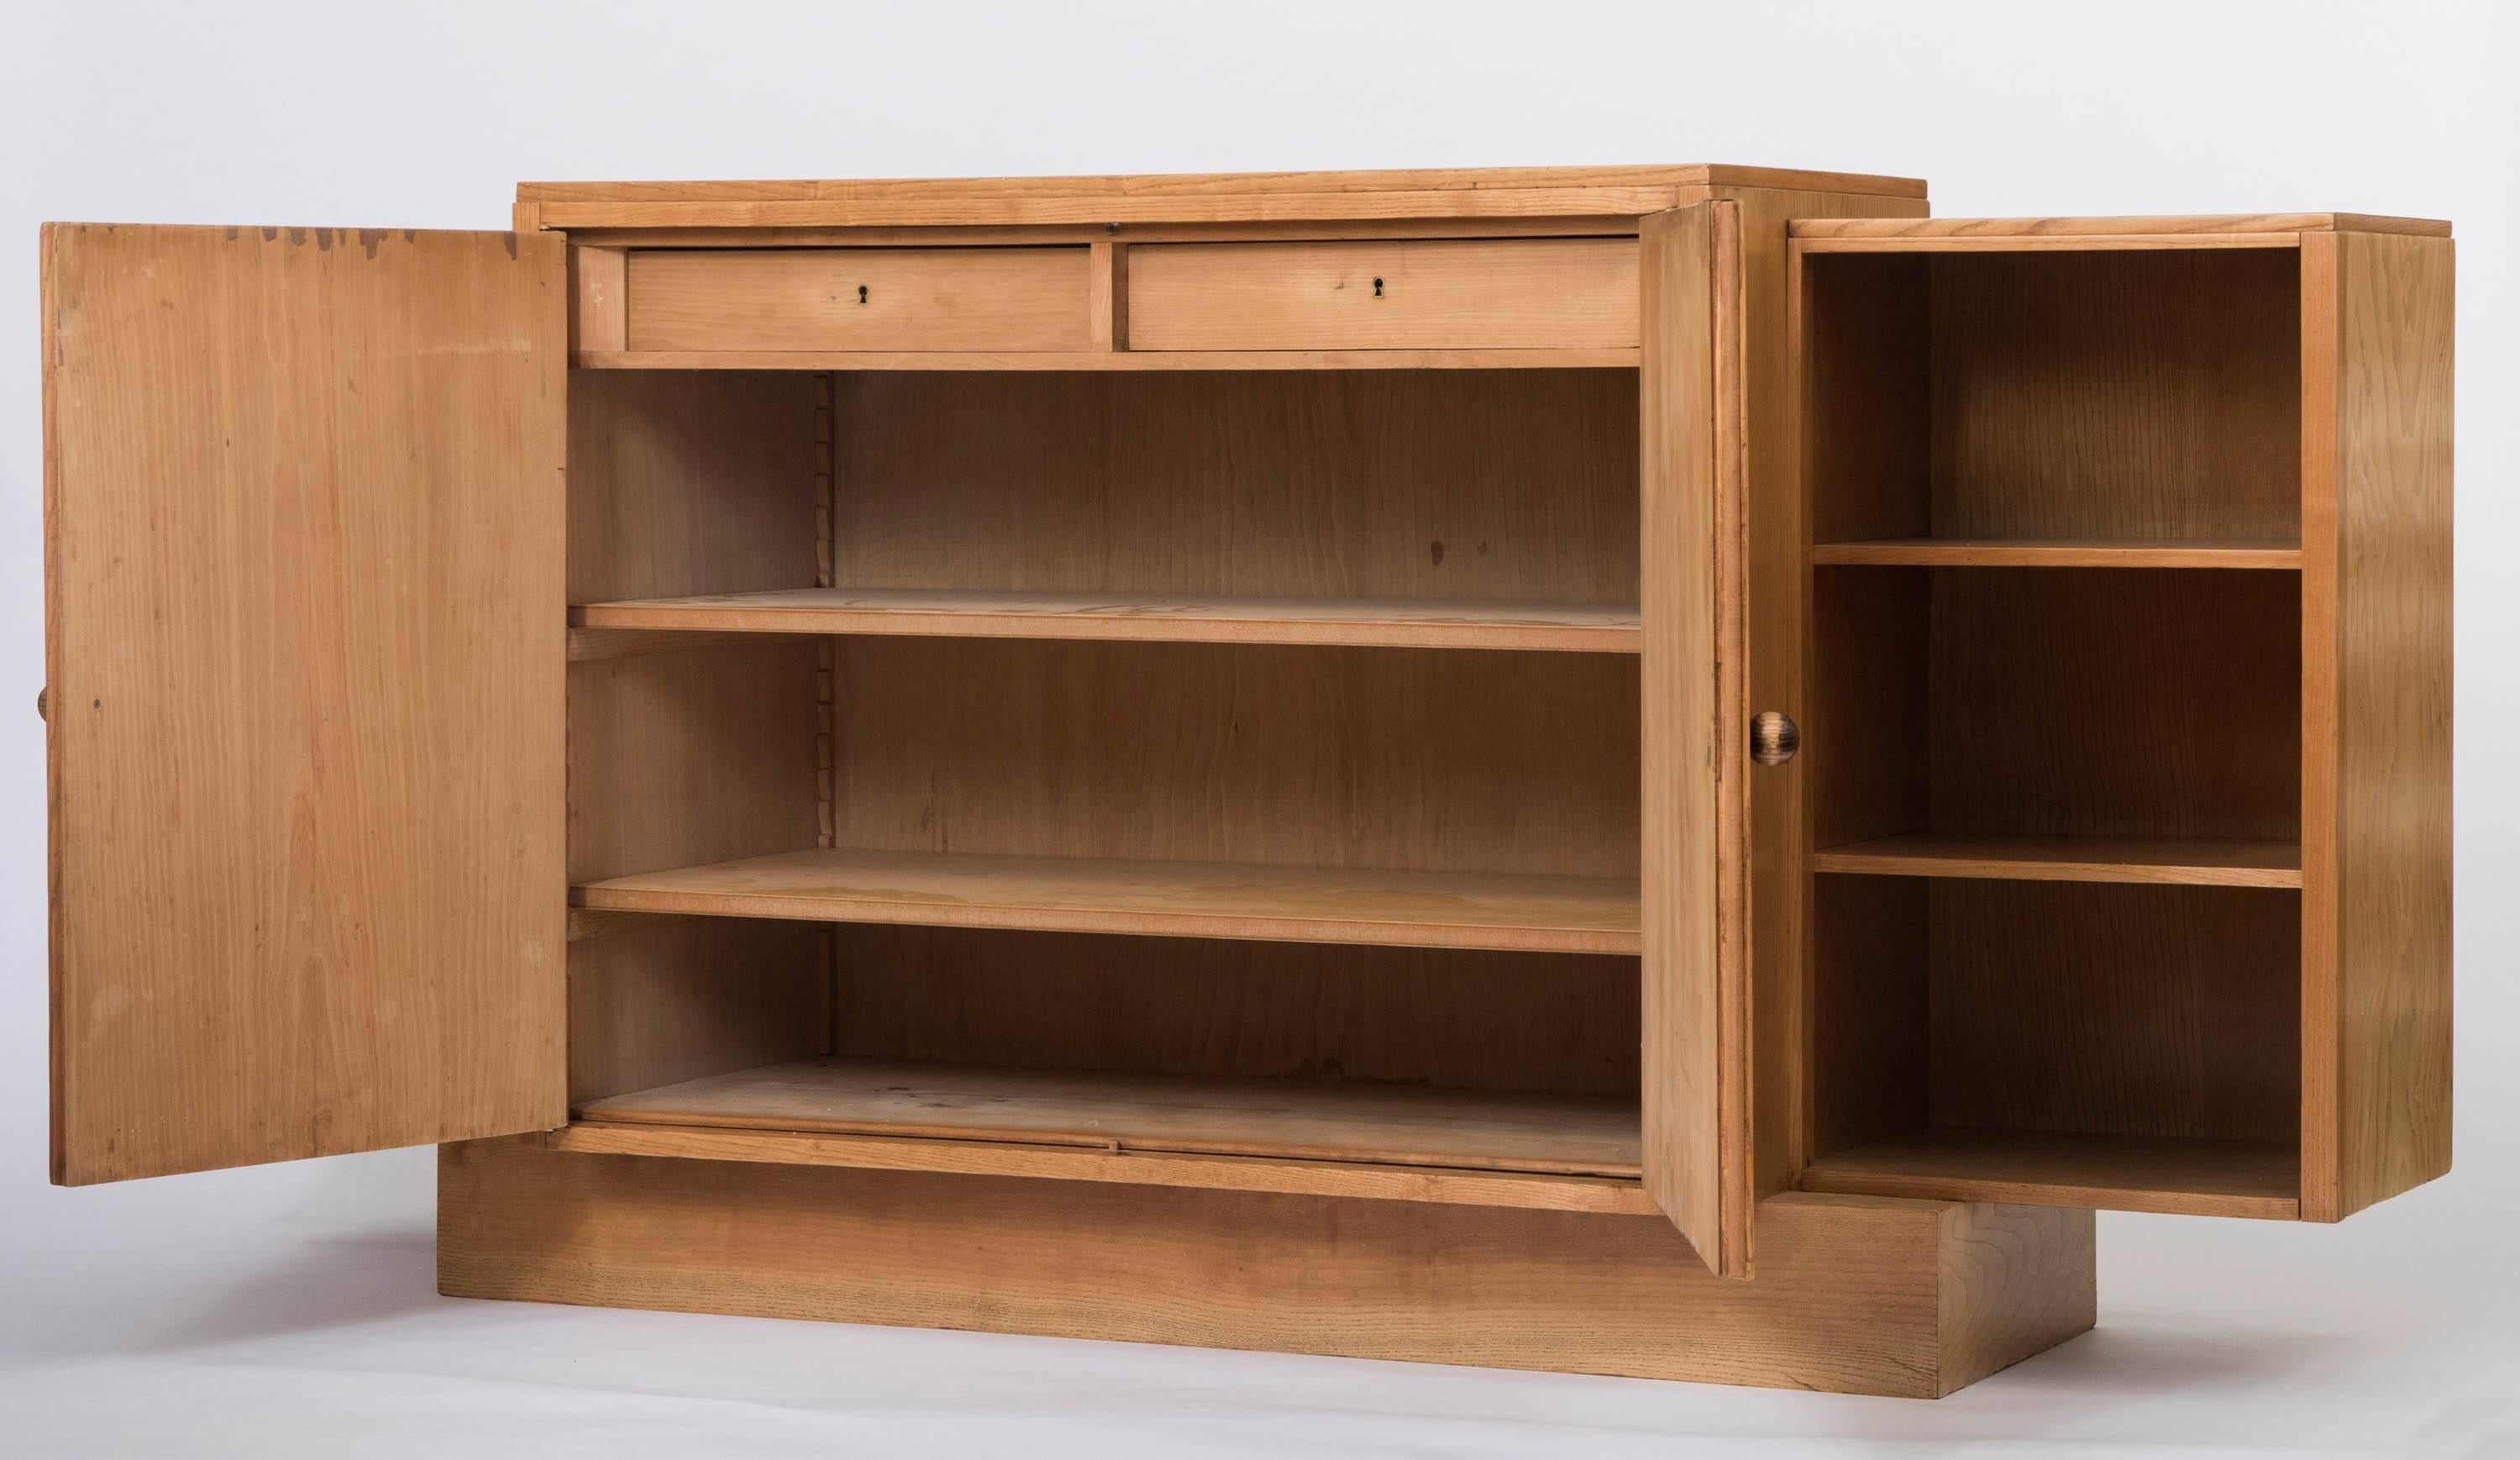 A rare oak bookcase by Jacques-Emile Ruhlmann designed for the Paris University.

In 1929 at the Salon des Artistes Decorateurs, Ruhlmann presented an apartment for a crown Prince of India, for the "Cite Universitaire", an ensemble